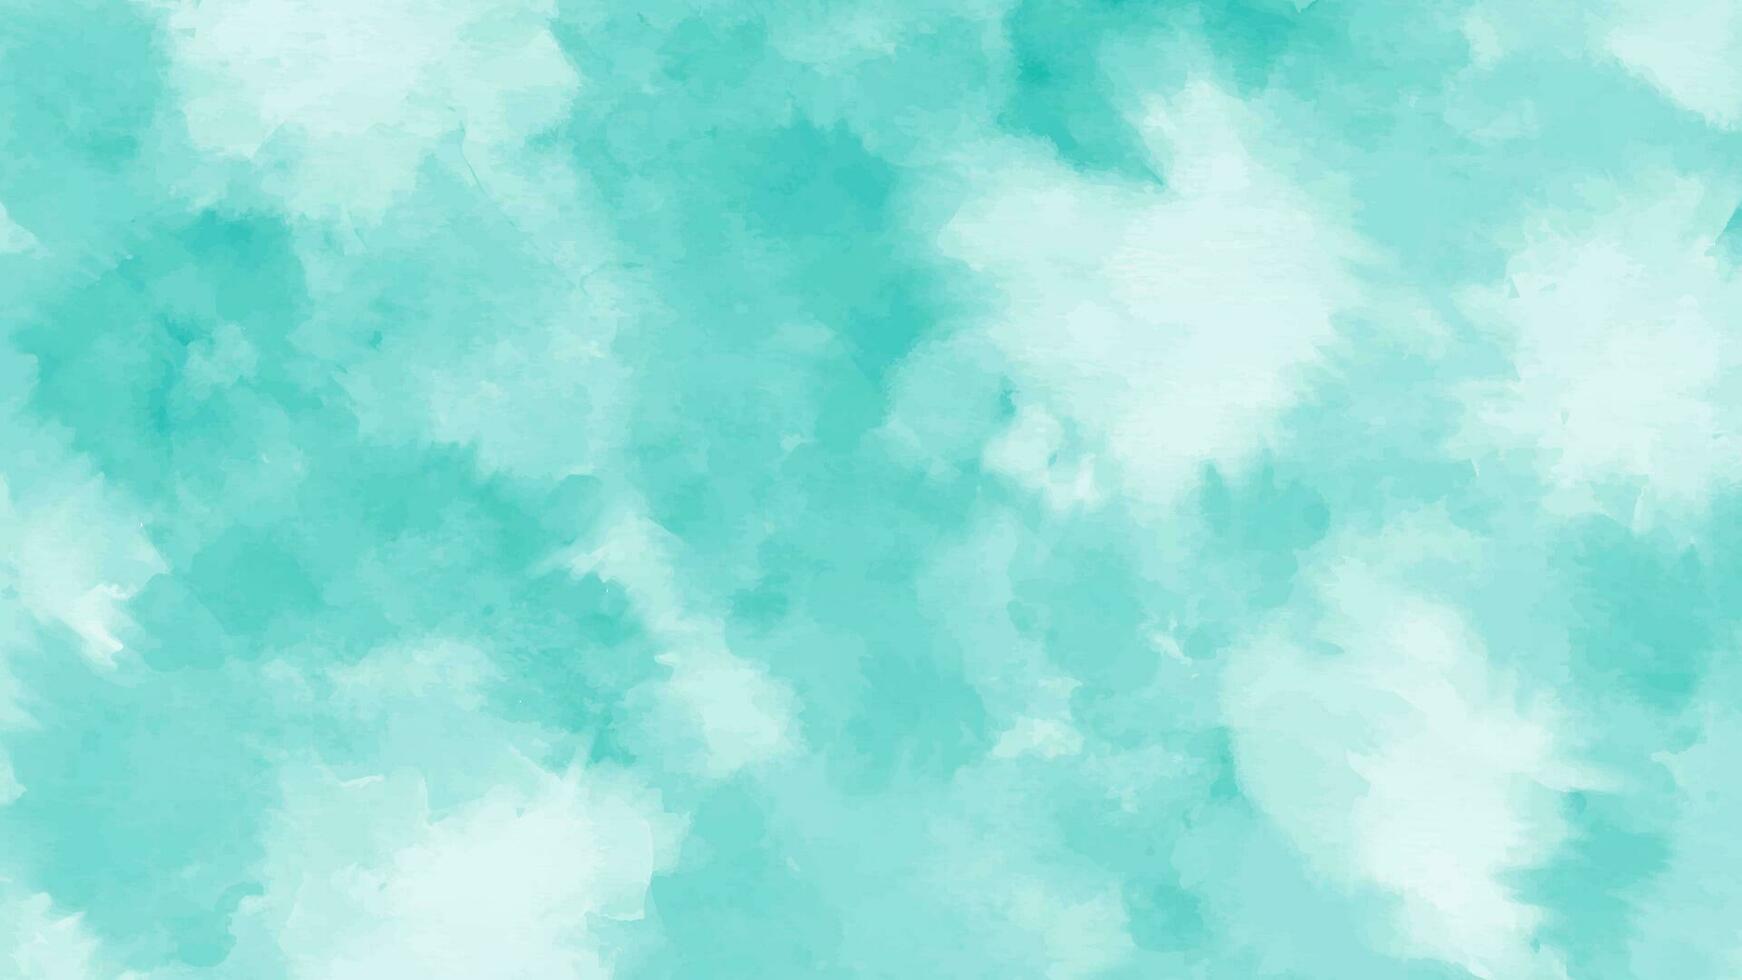 Mint abstract watercolor texture background. Green watercolour brush splash pattern vector